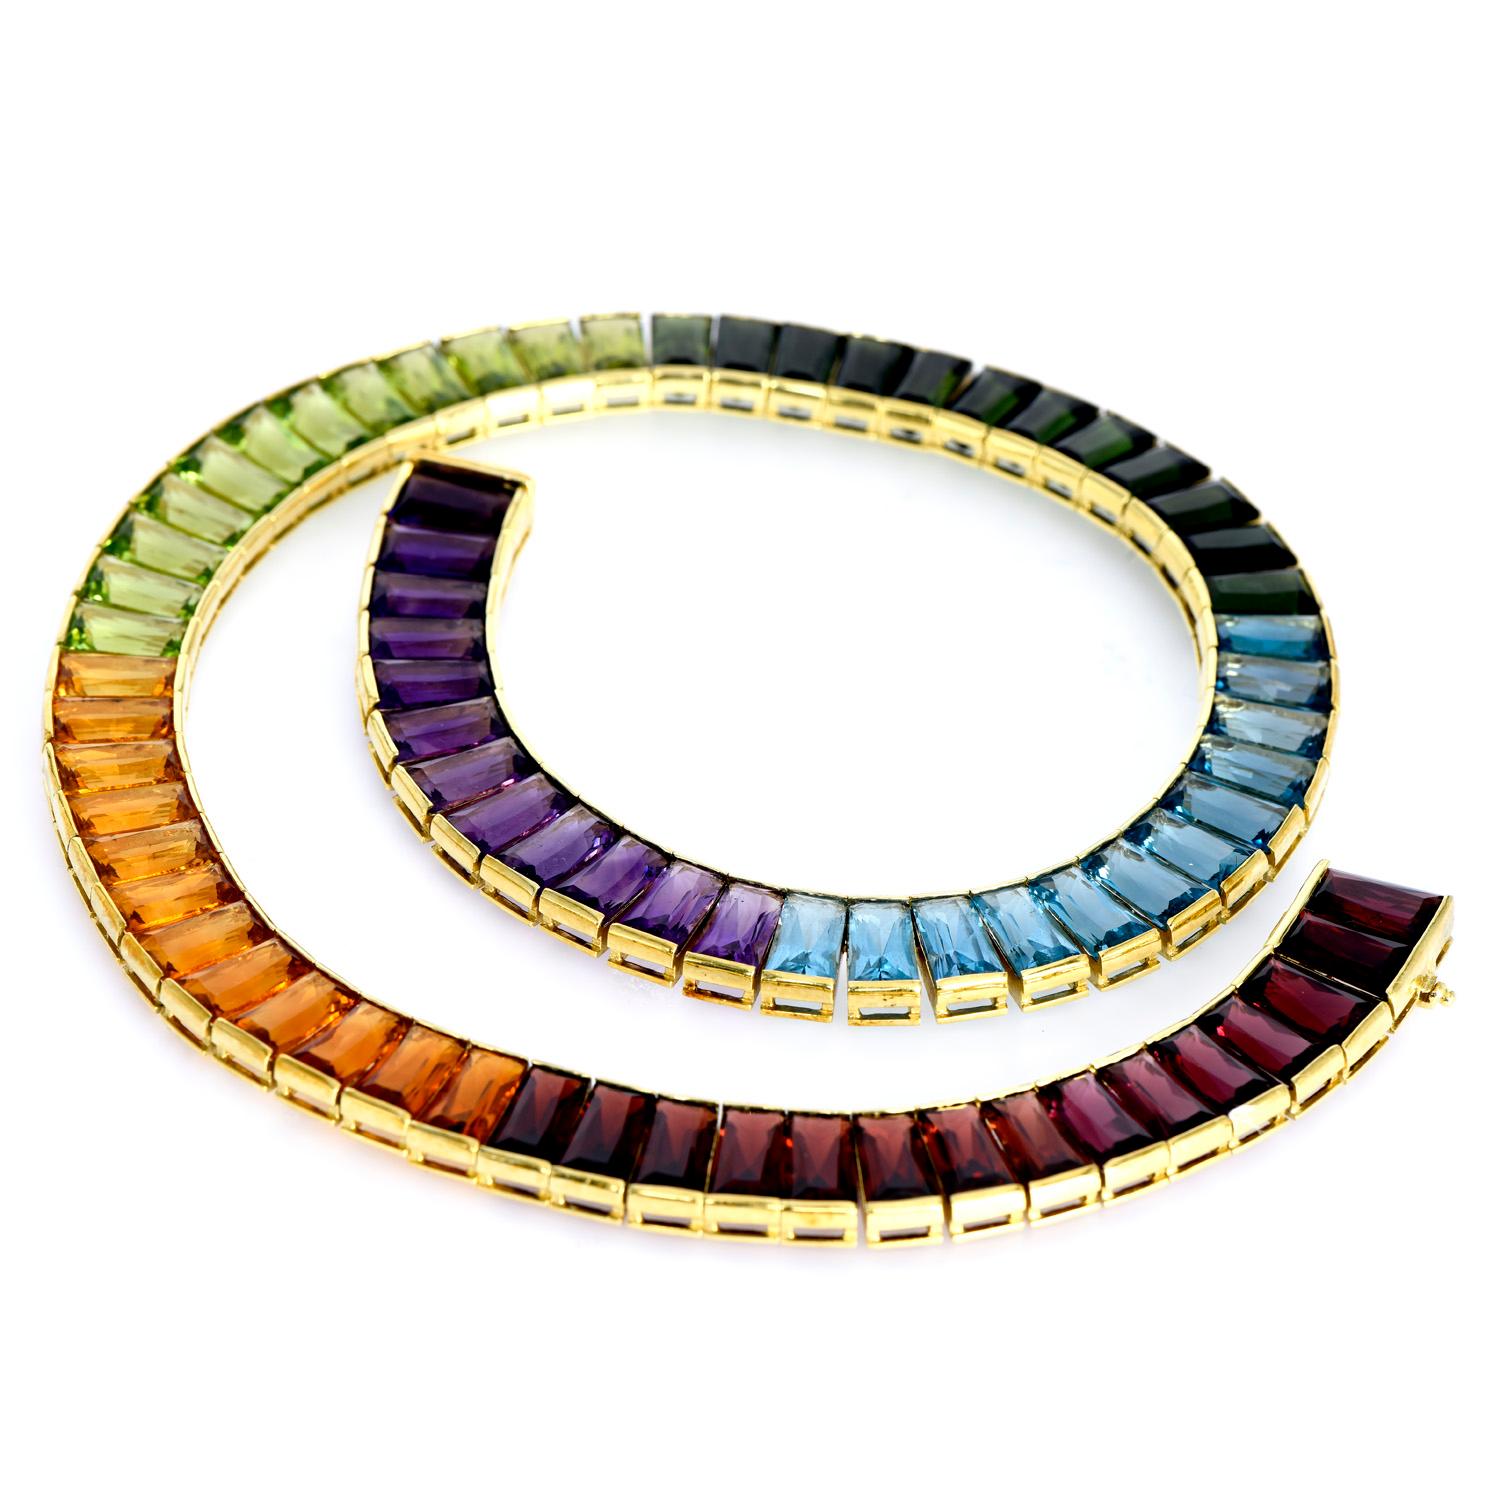 A timeless piece from the 1980s, inspired by the colors of the rainbow.

This H. Stern necklace is crafted in solid 18K yellow gold, with a multicolor display of fine gemstones.

Presenting a color gradient of red garnet, pink & green tourmaline,